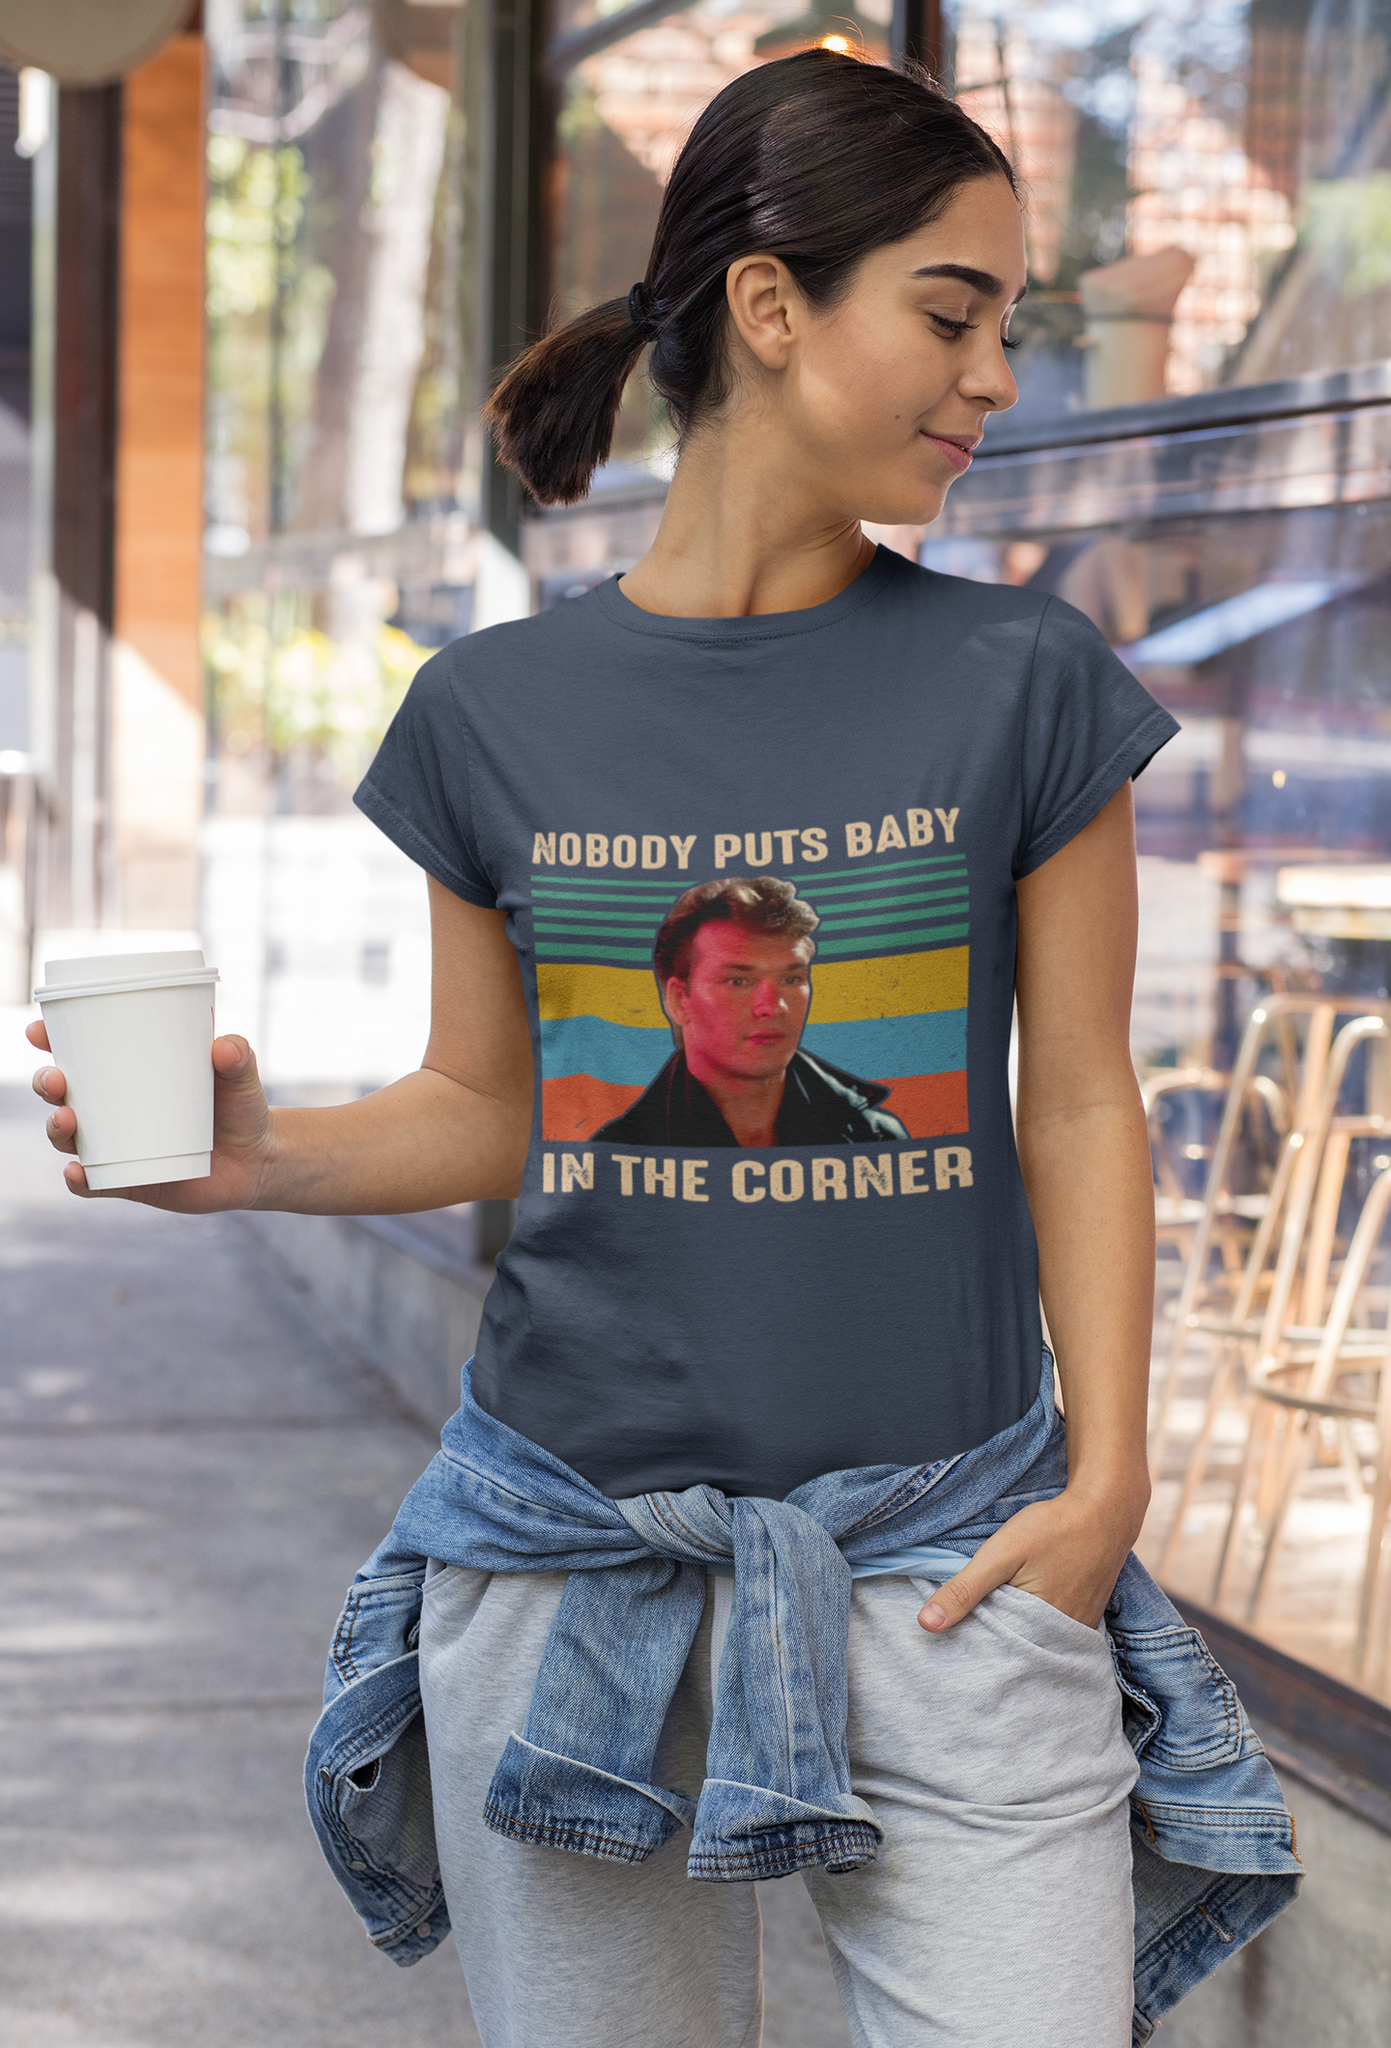 Dirty Dancing Vintage T Shirt, Johnny Castle Tshirt, Nobody Puts Baby In The Corner Shirt